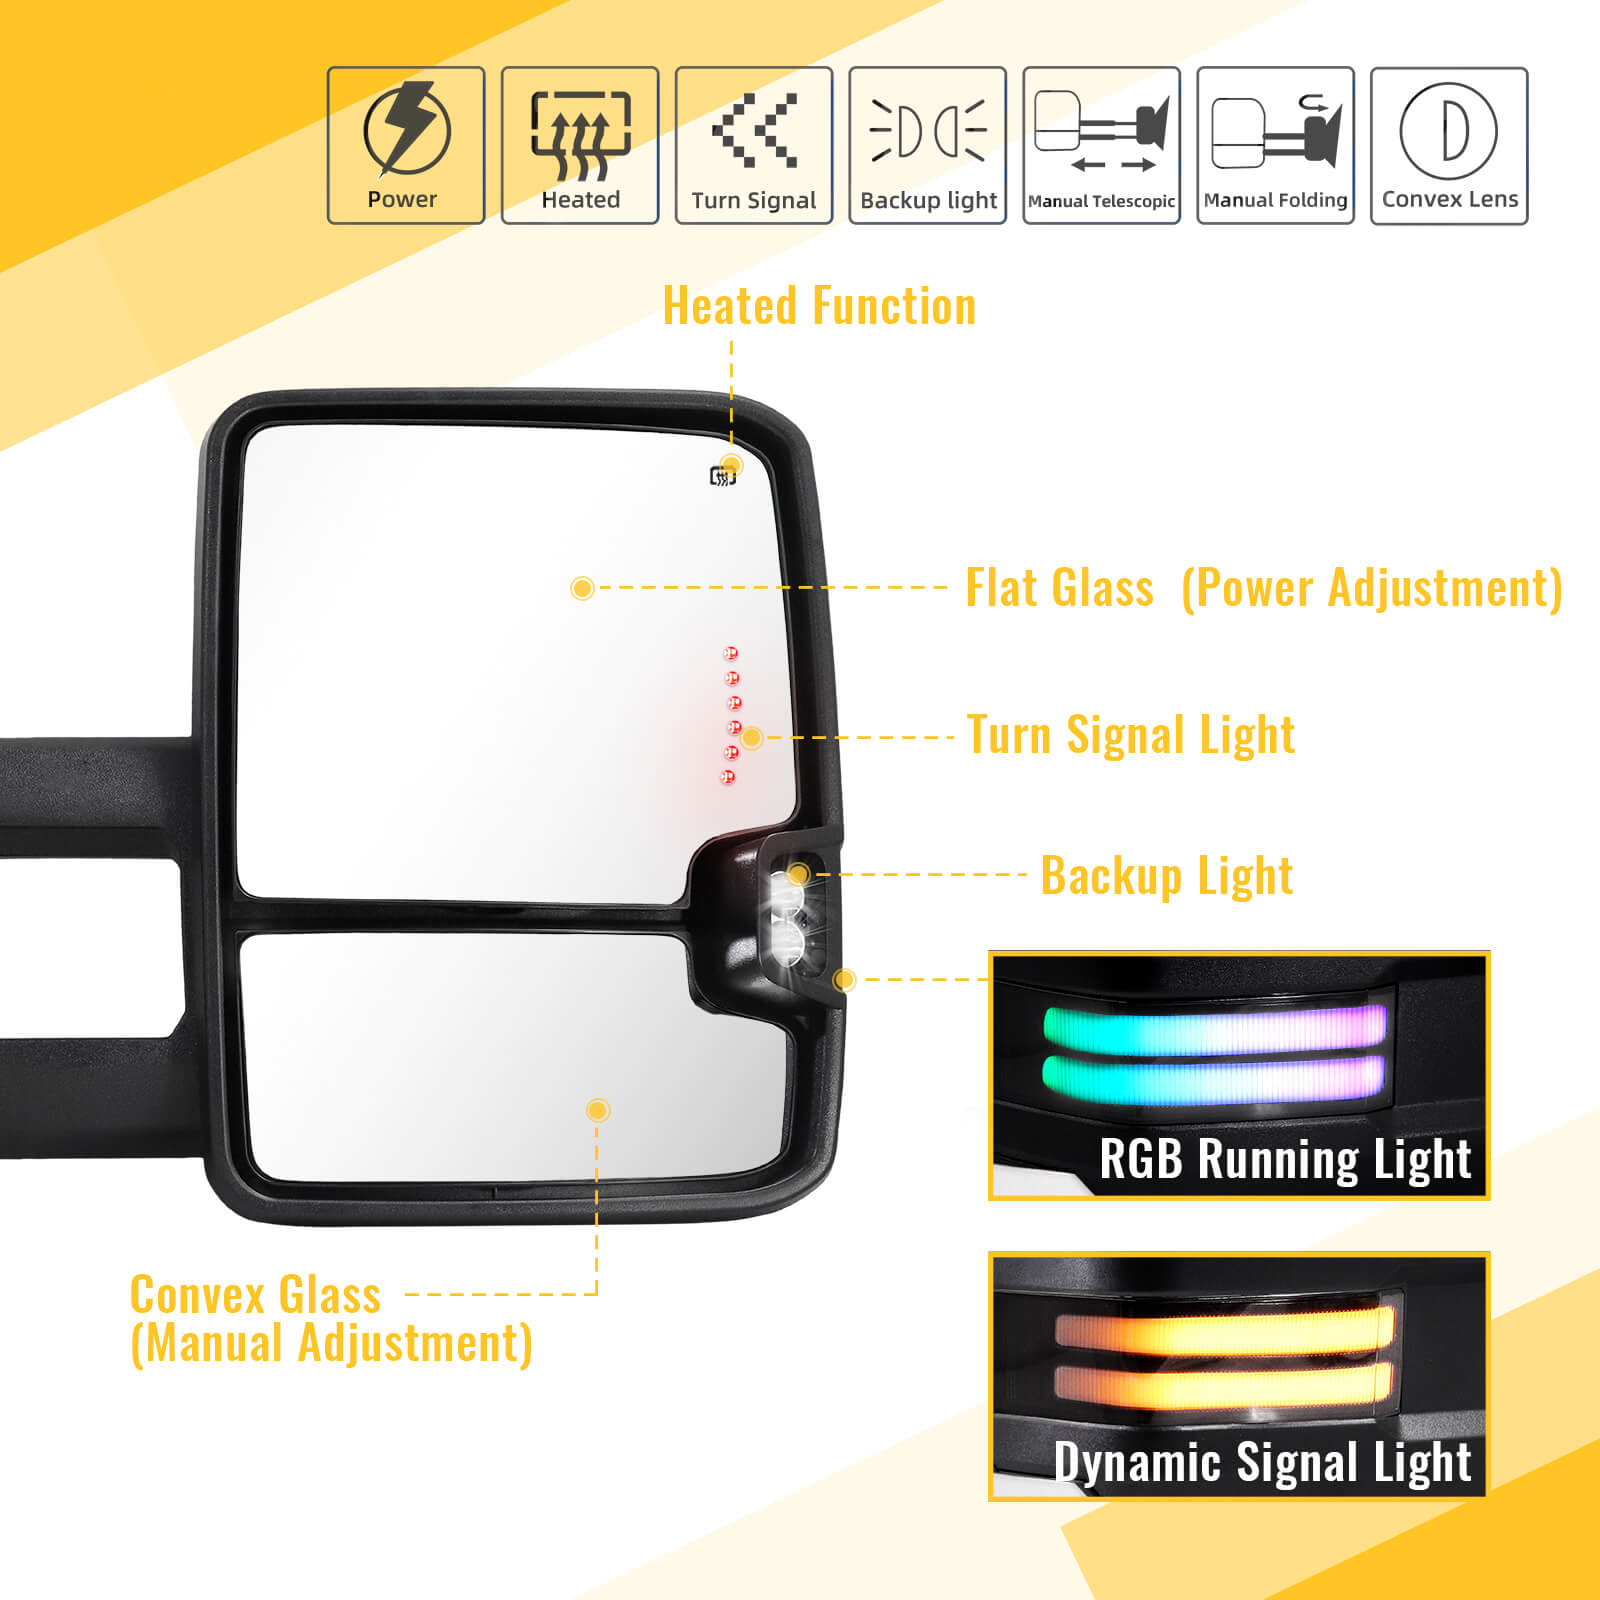 Chrome RGB Towing Mirrors with Adjustable Lighting & Harness for 2014 - 2019 CHEVY Silverado GMC Sierra etc.